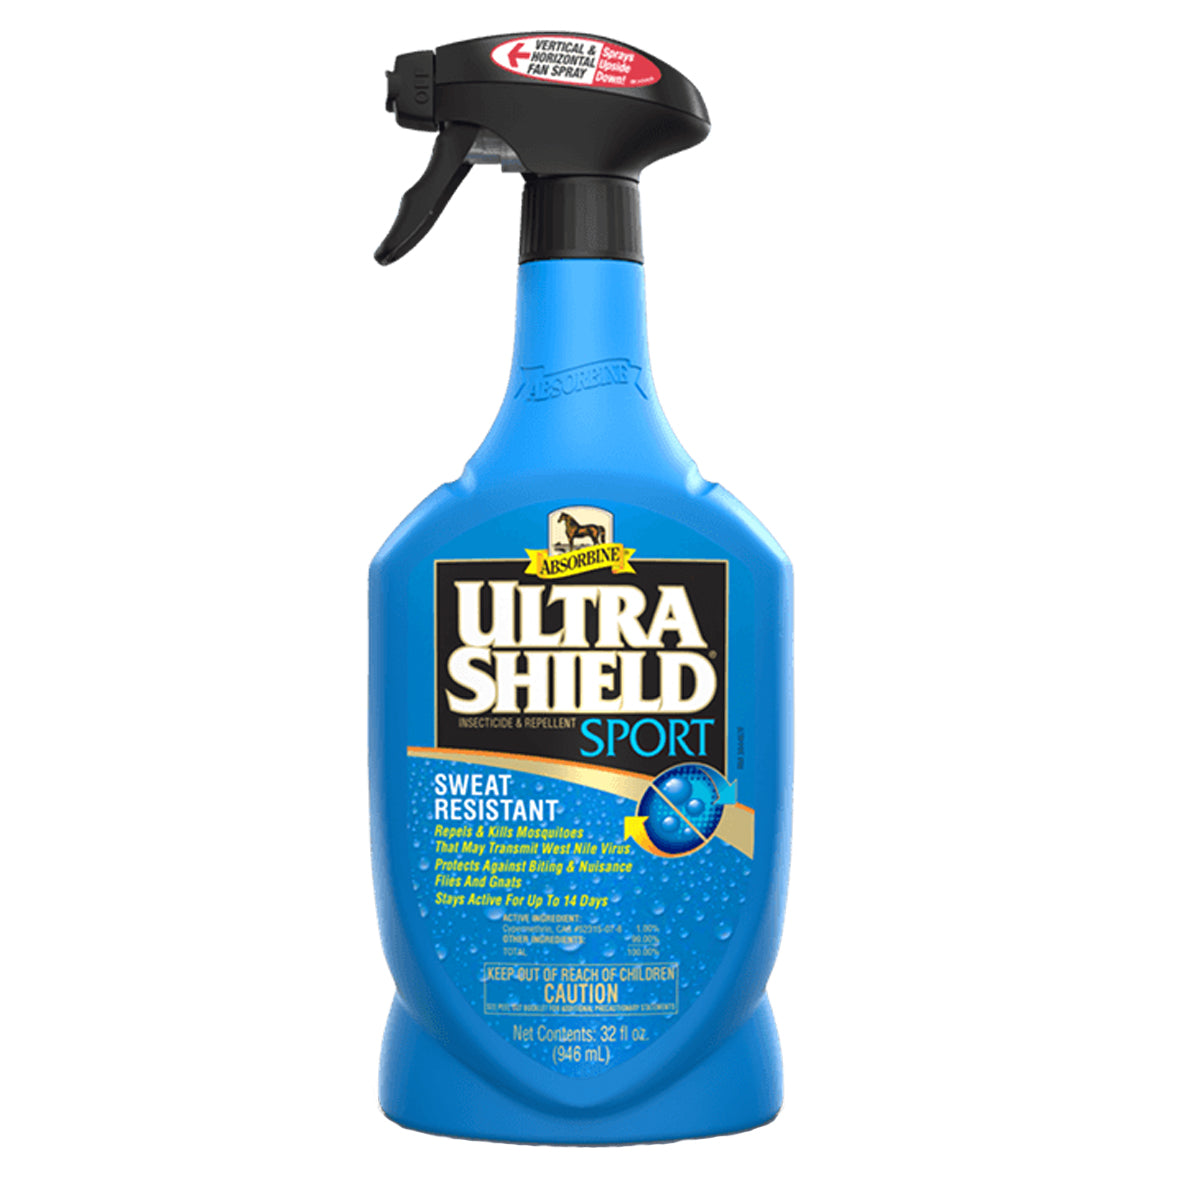 UltraShield Sport Insecticide & Repellent